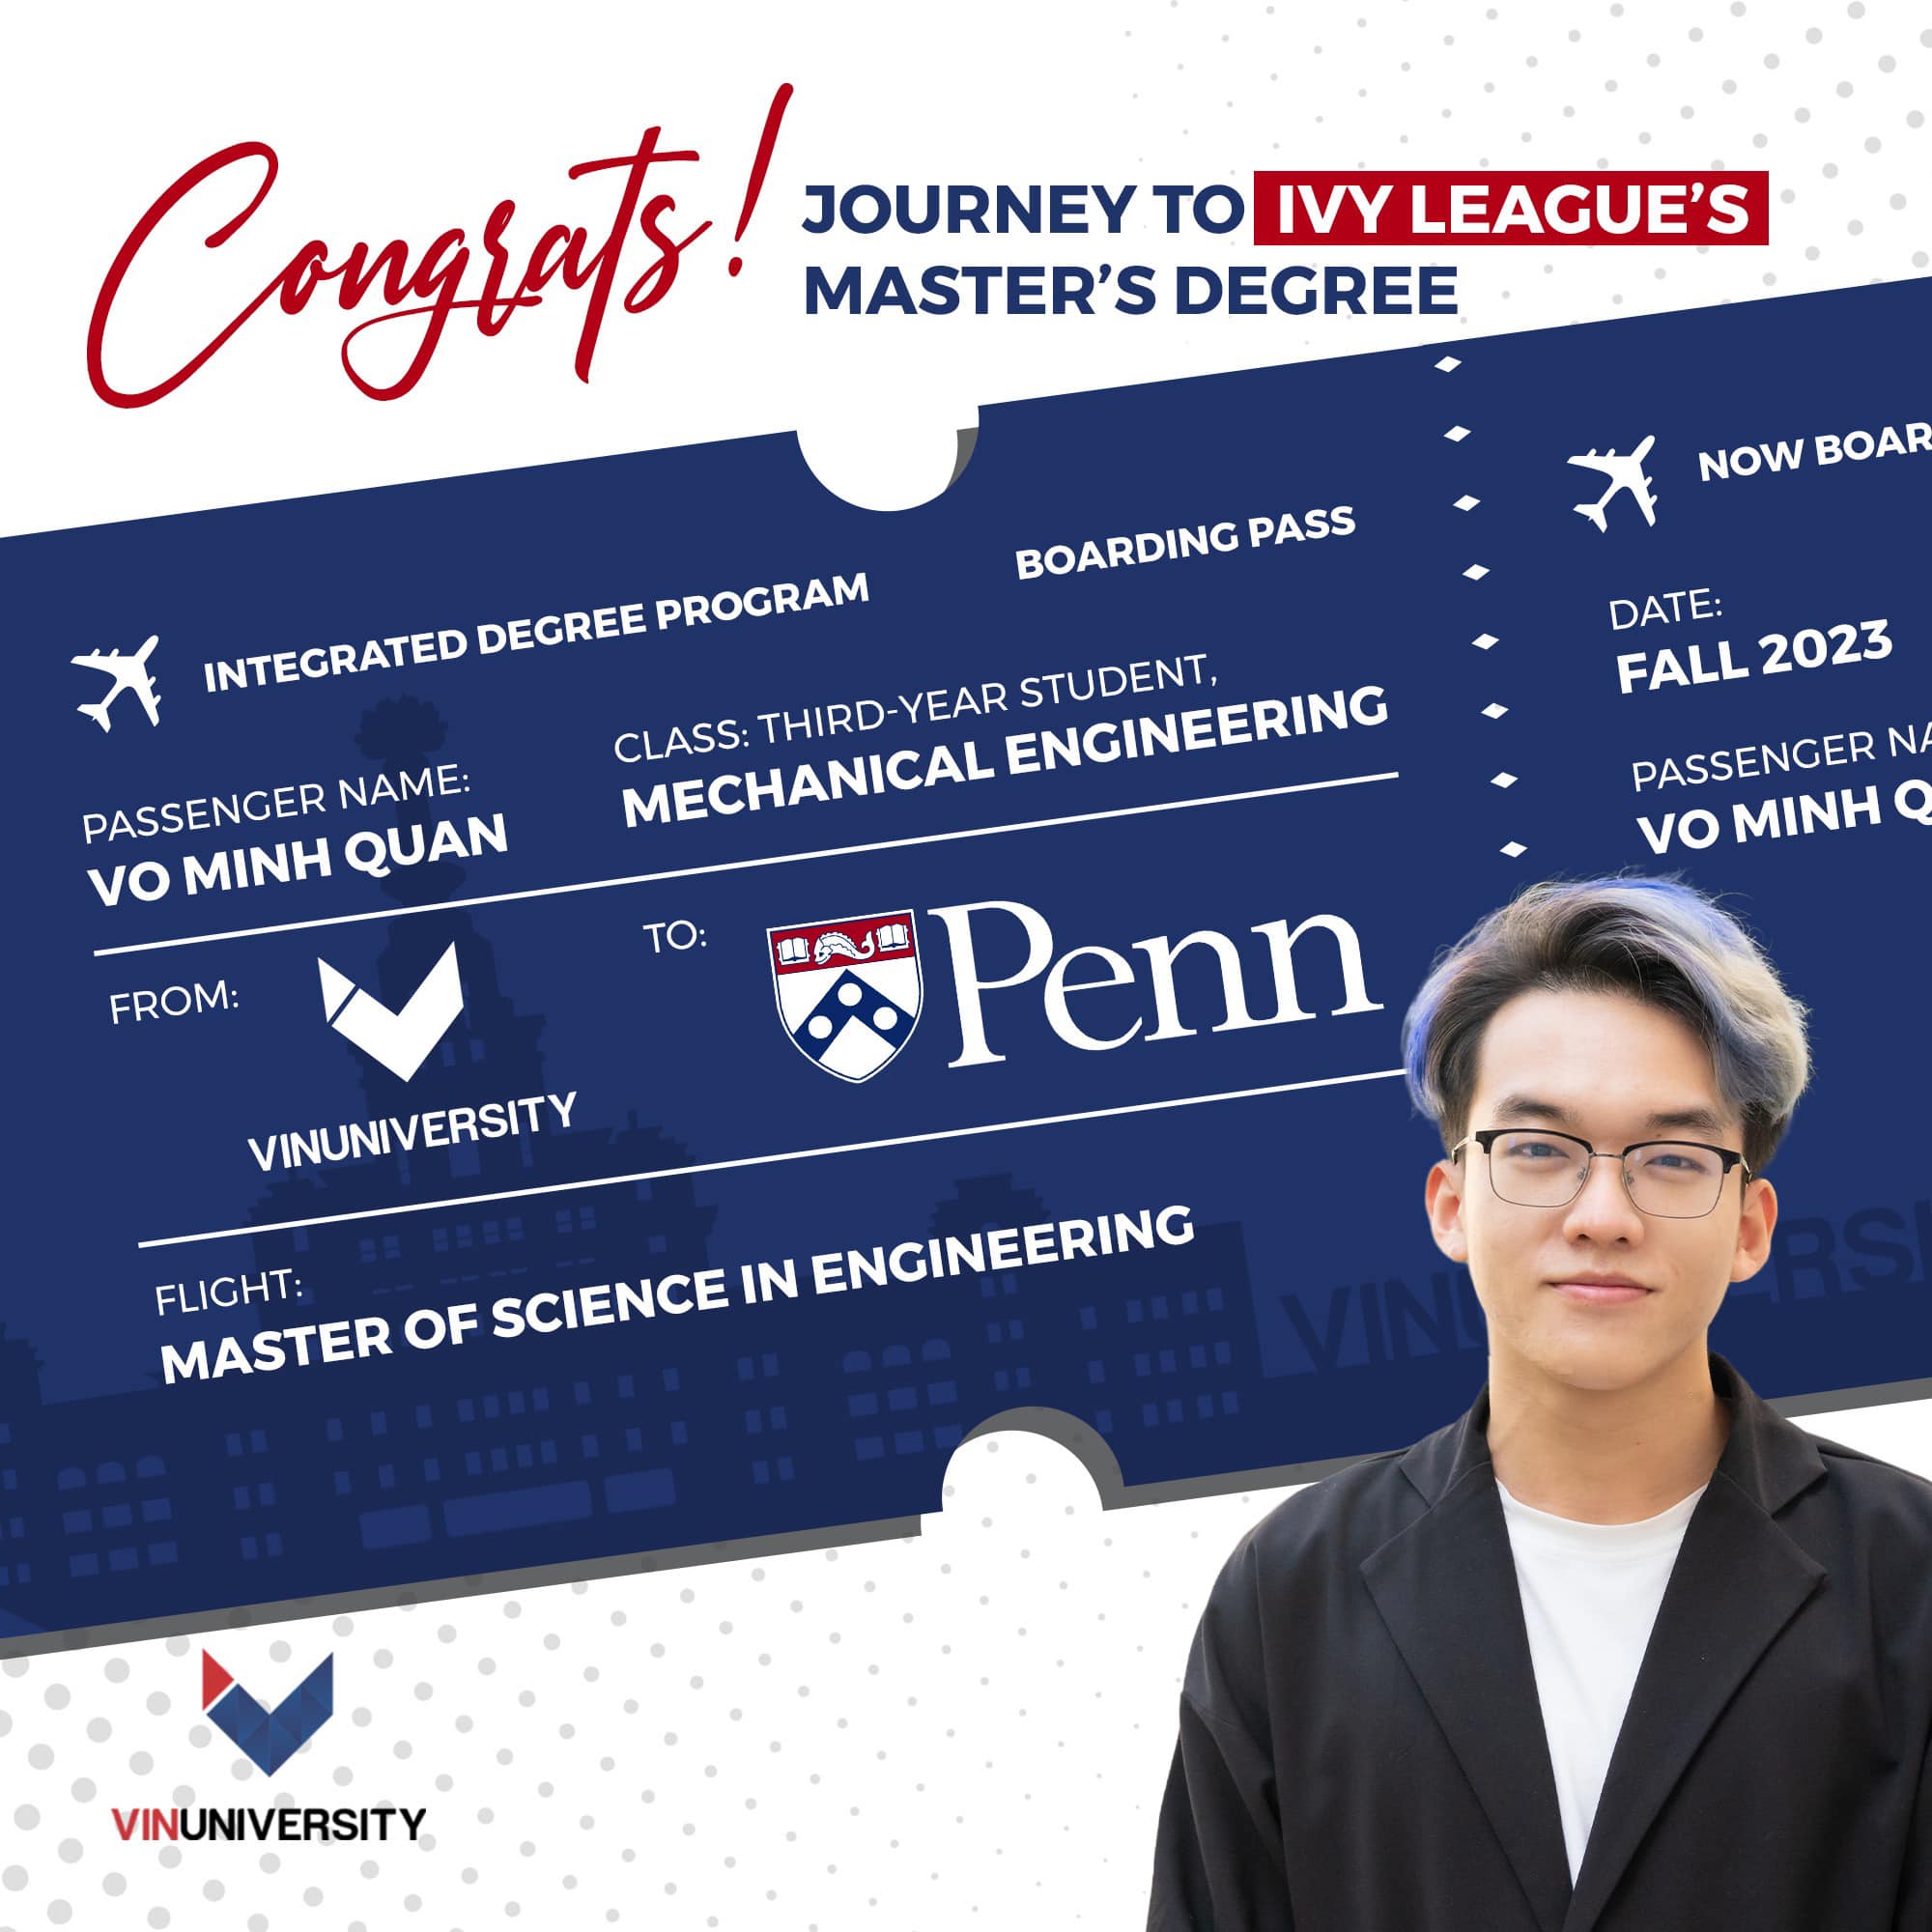 THE THIRD-YEAR VINUNIAN, VO MINH QUAN & HIS JOURNEY TO UPENN